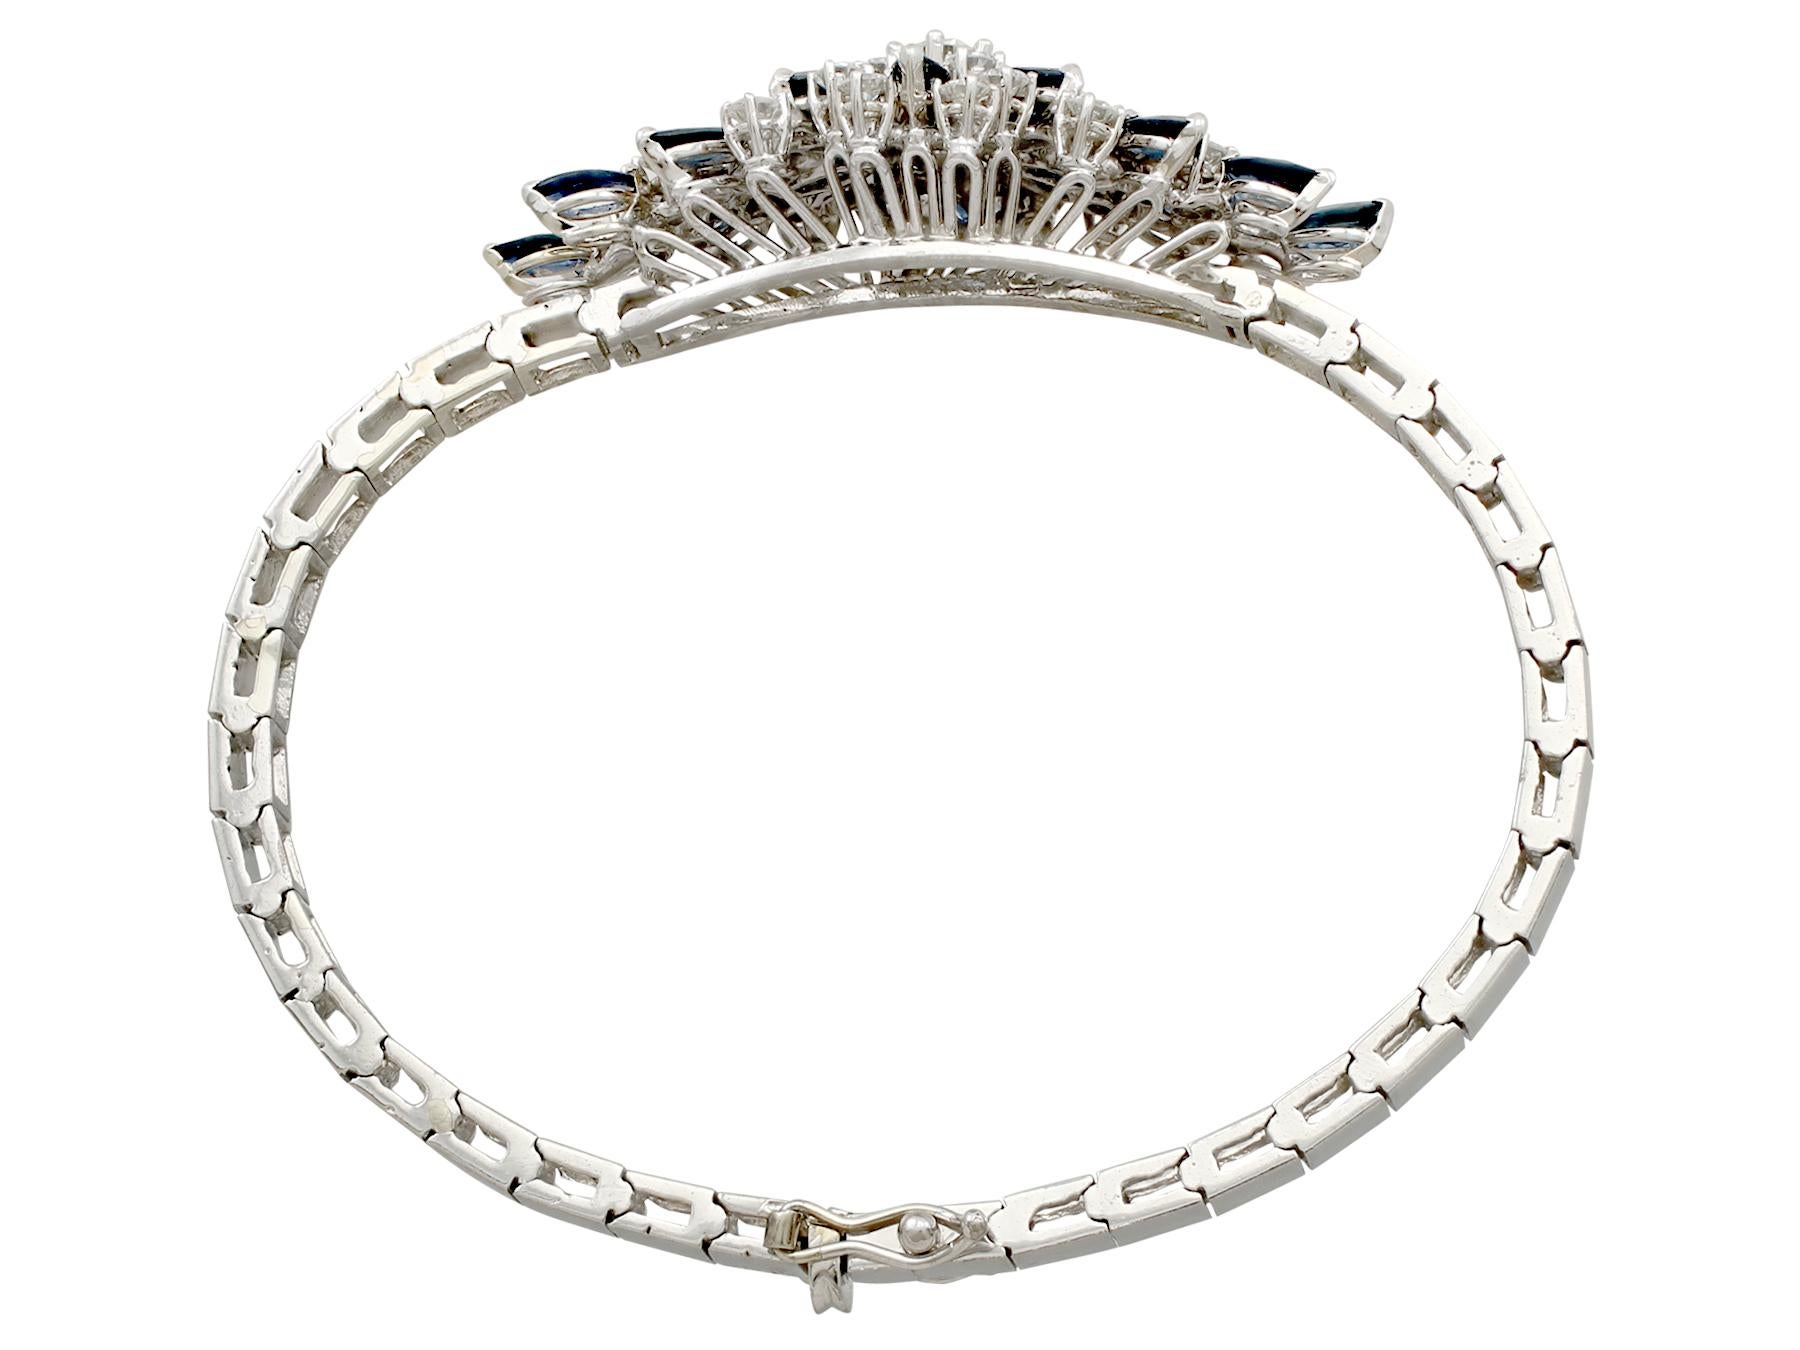 An impressive vintage 2.10 carat sapphire and 2.51 carat diamond, 18 karat white gold bracelet; part of our diverse gemstone jewelry and estate jewelry collections.

This fine and impressive vintage sapphire bracelet has been crafted in 18k white